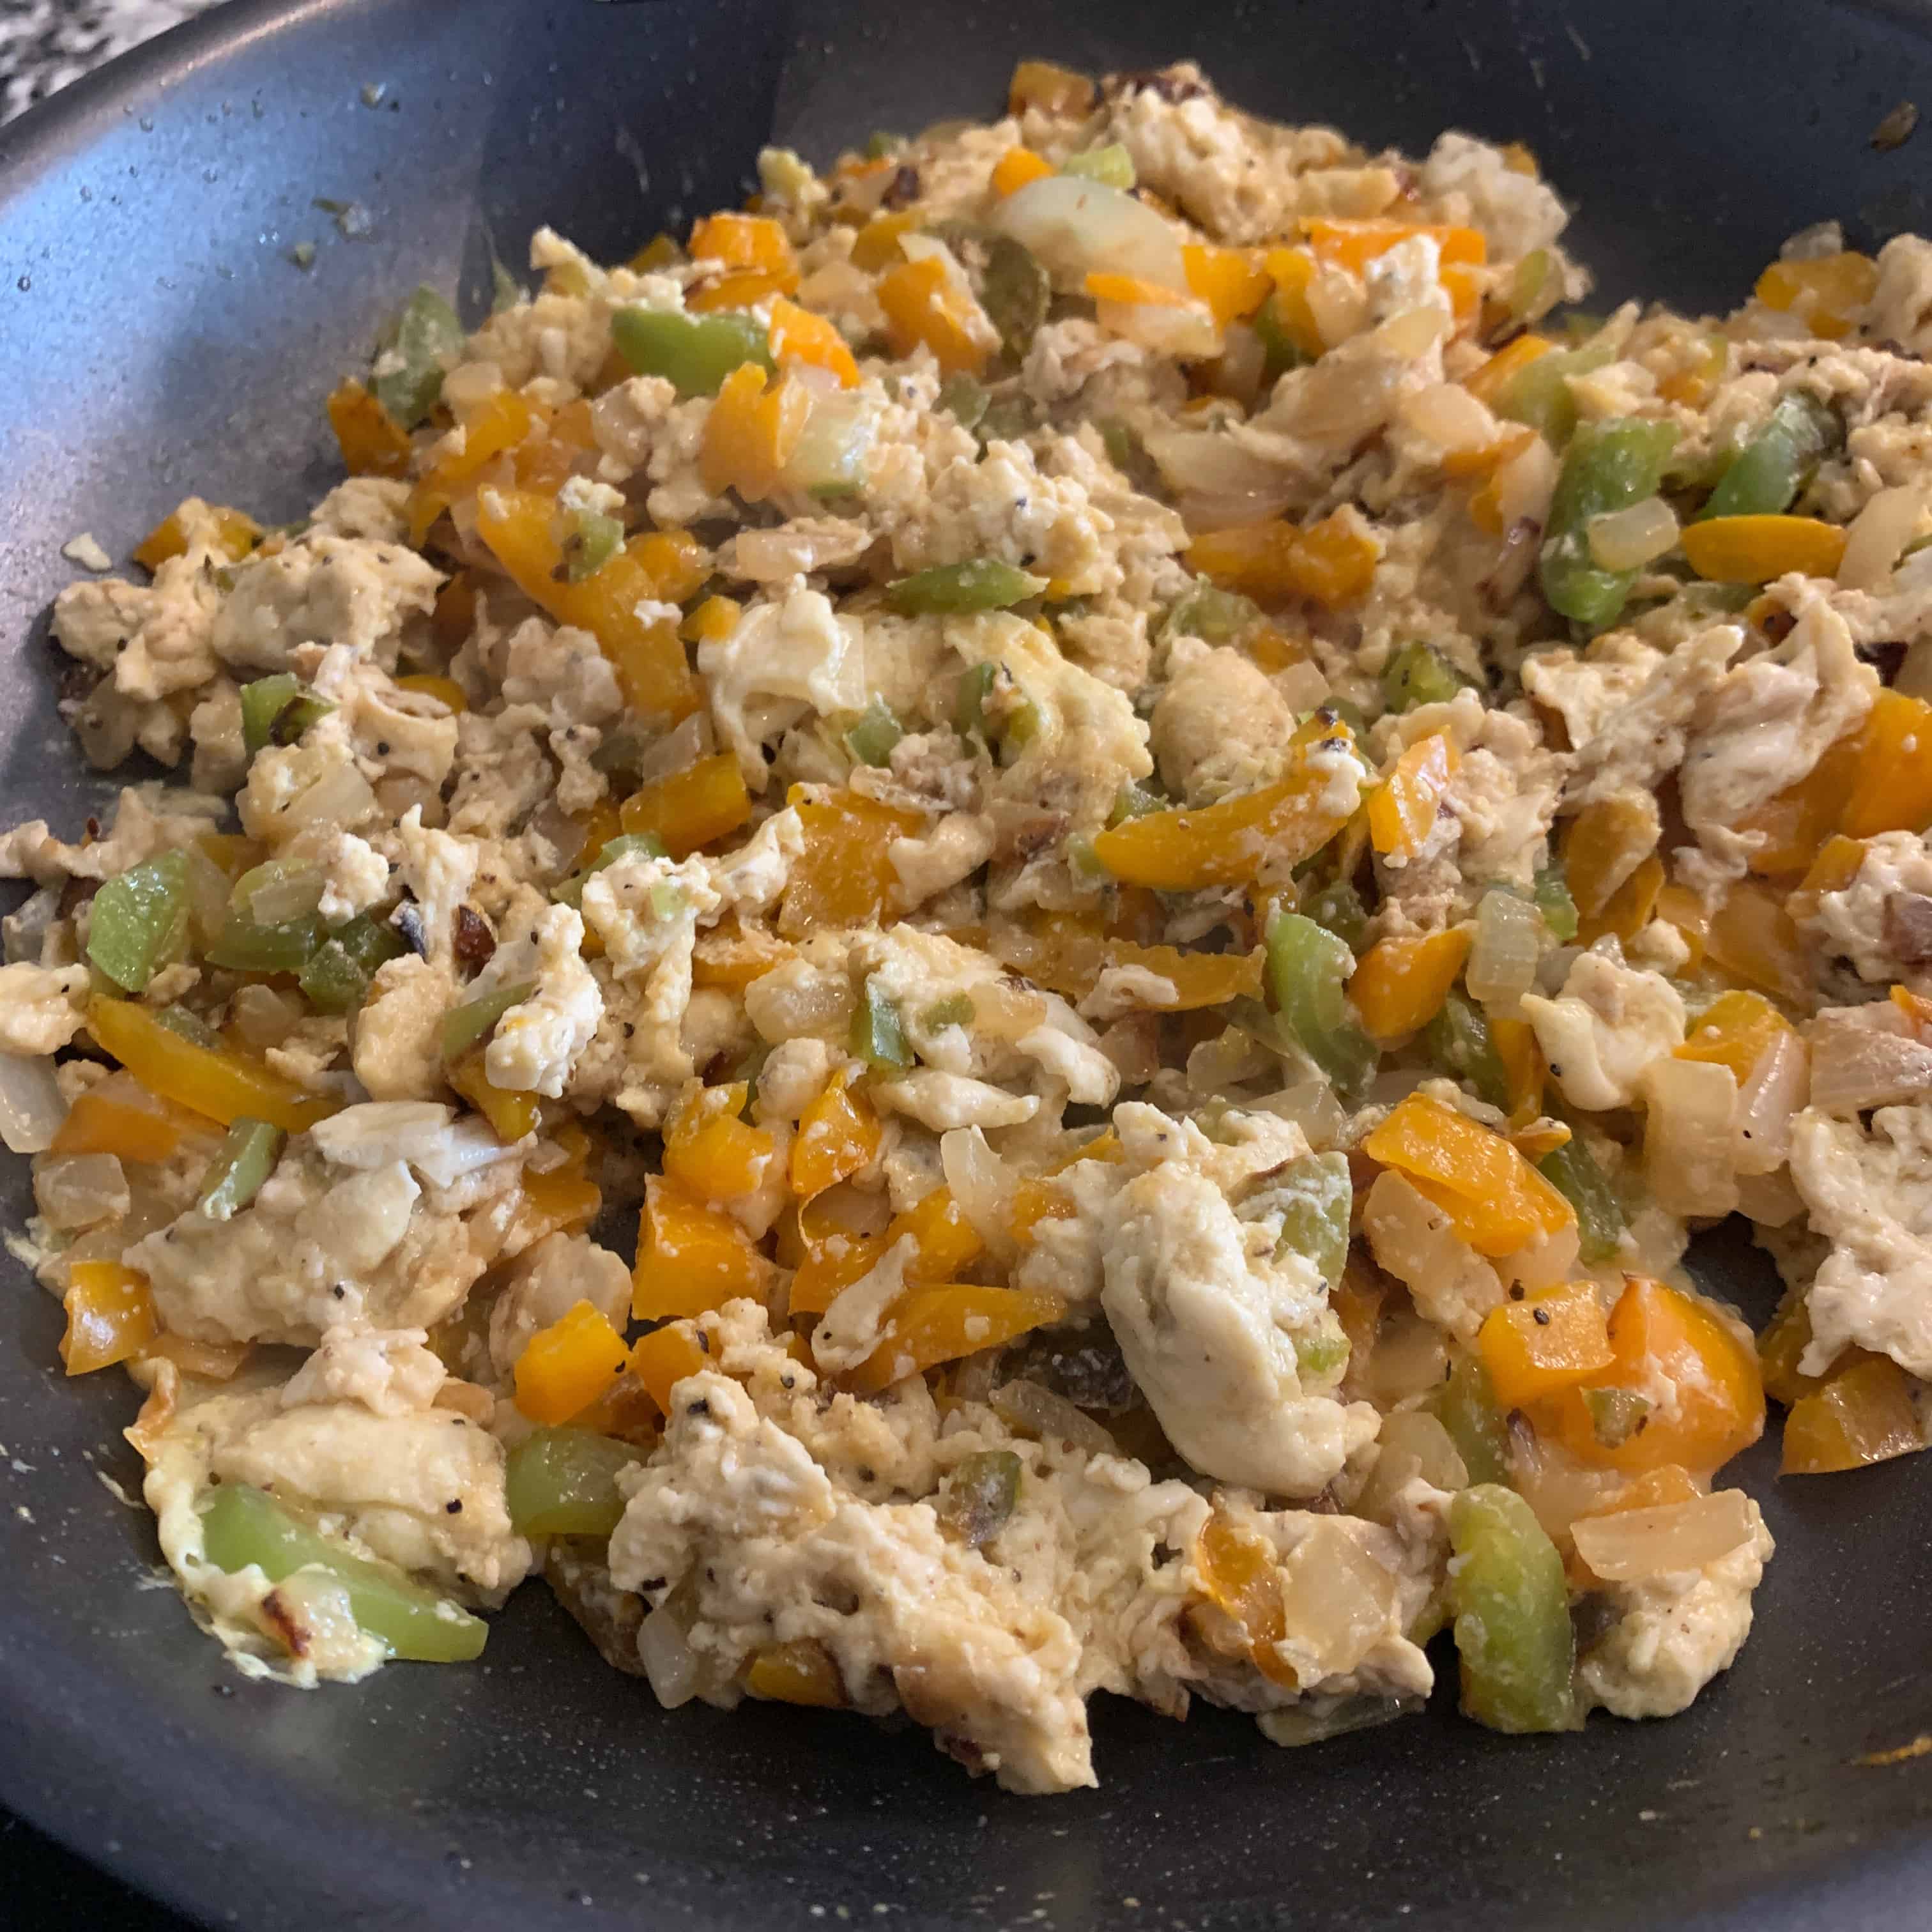 eggs scrambled with veggies for breakfast tacos